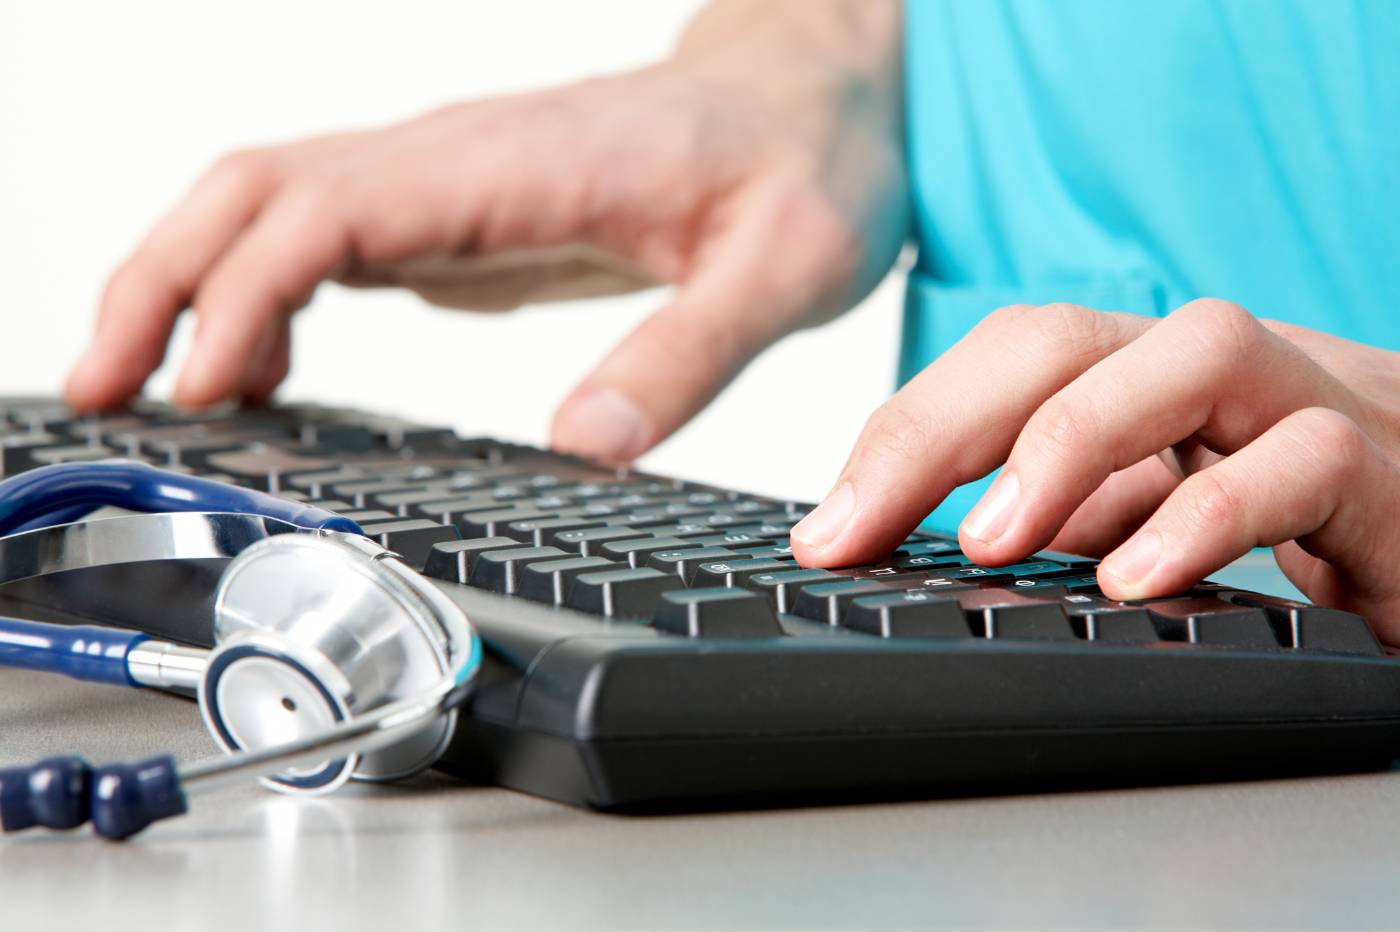 Hand entering data on a computer keyboard in a medical setting.